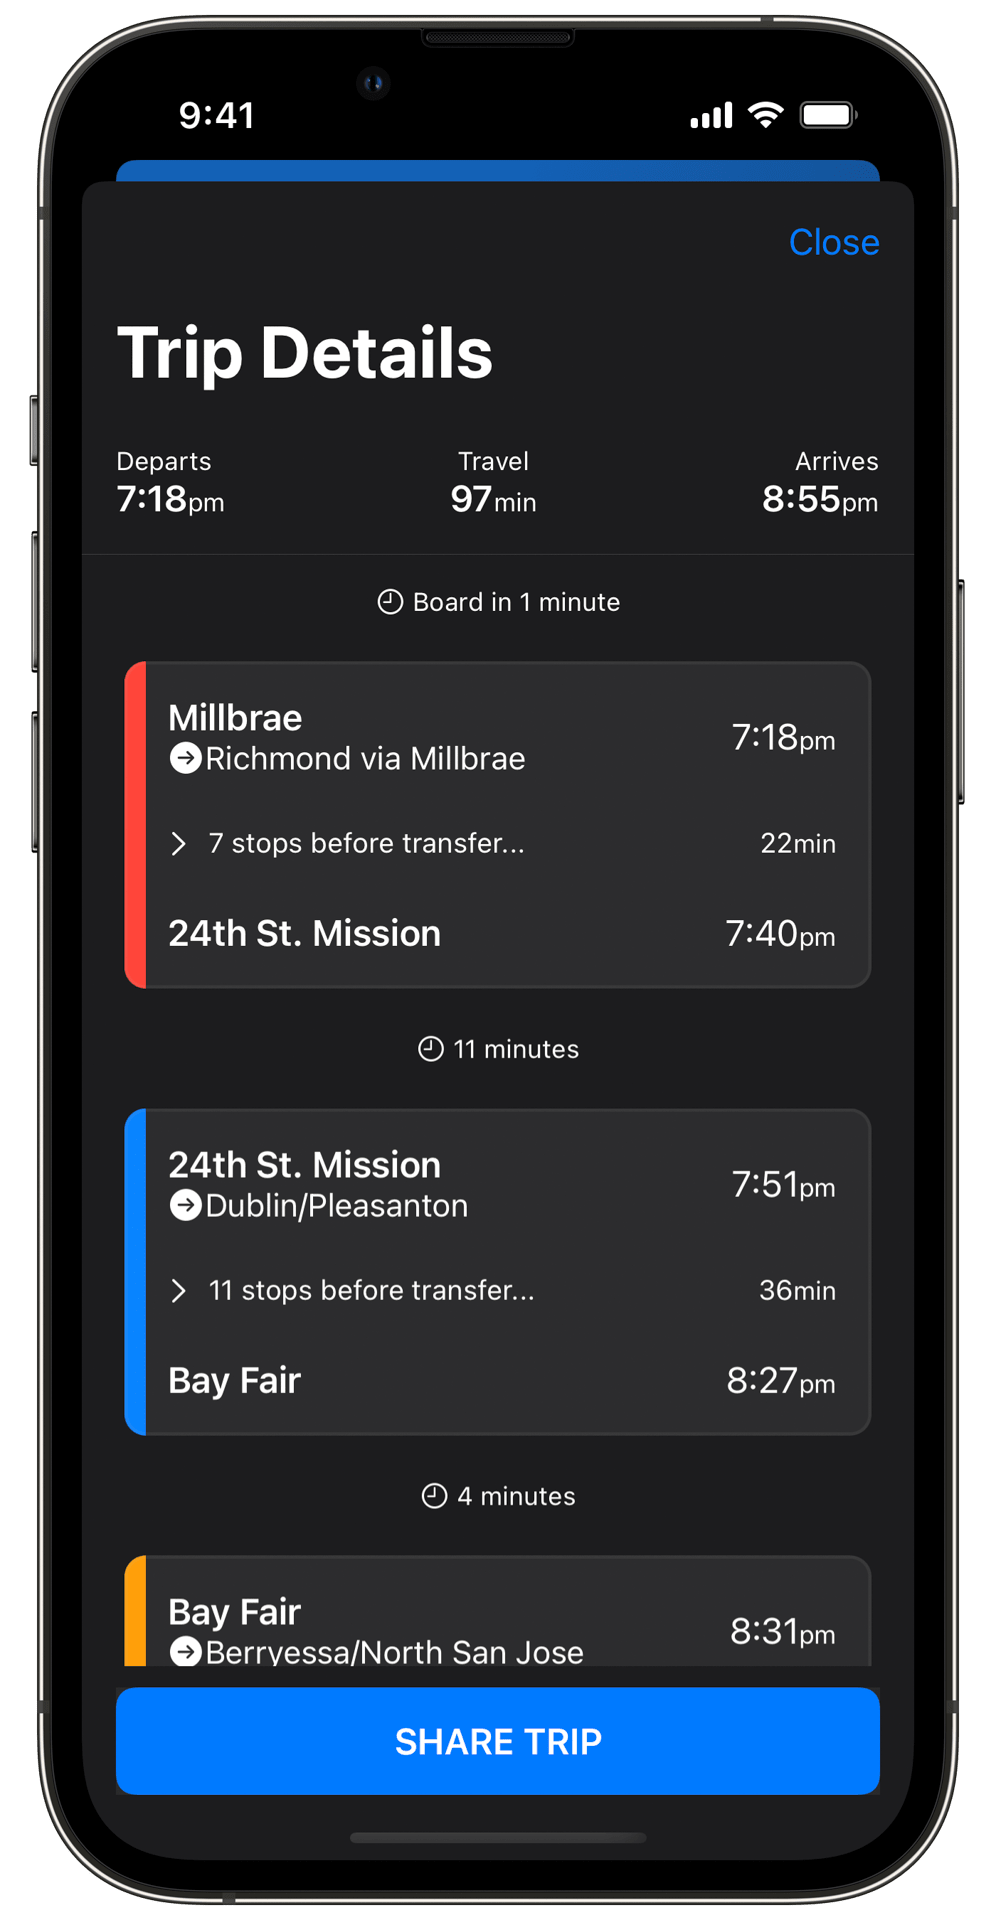 Trip detail screen of the Arrival BART app in dark mode. The screen shows transfer times and windows.